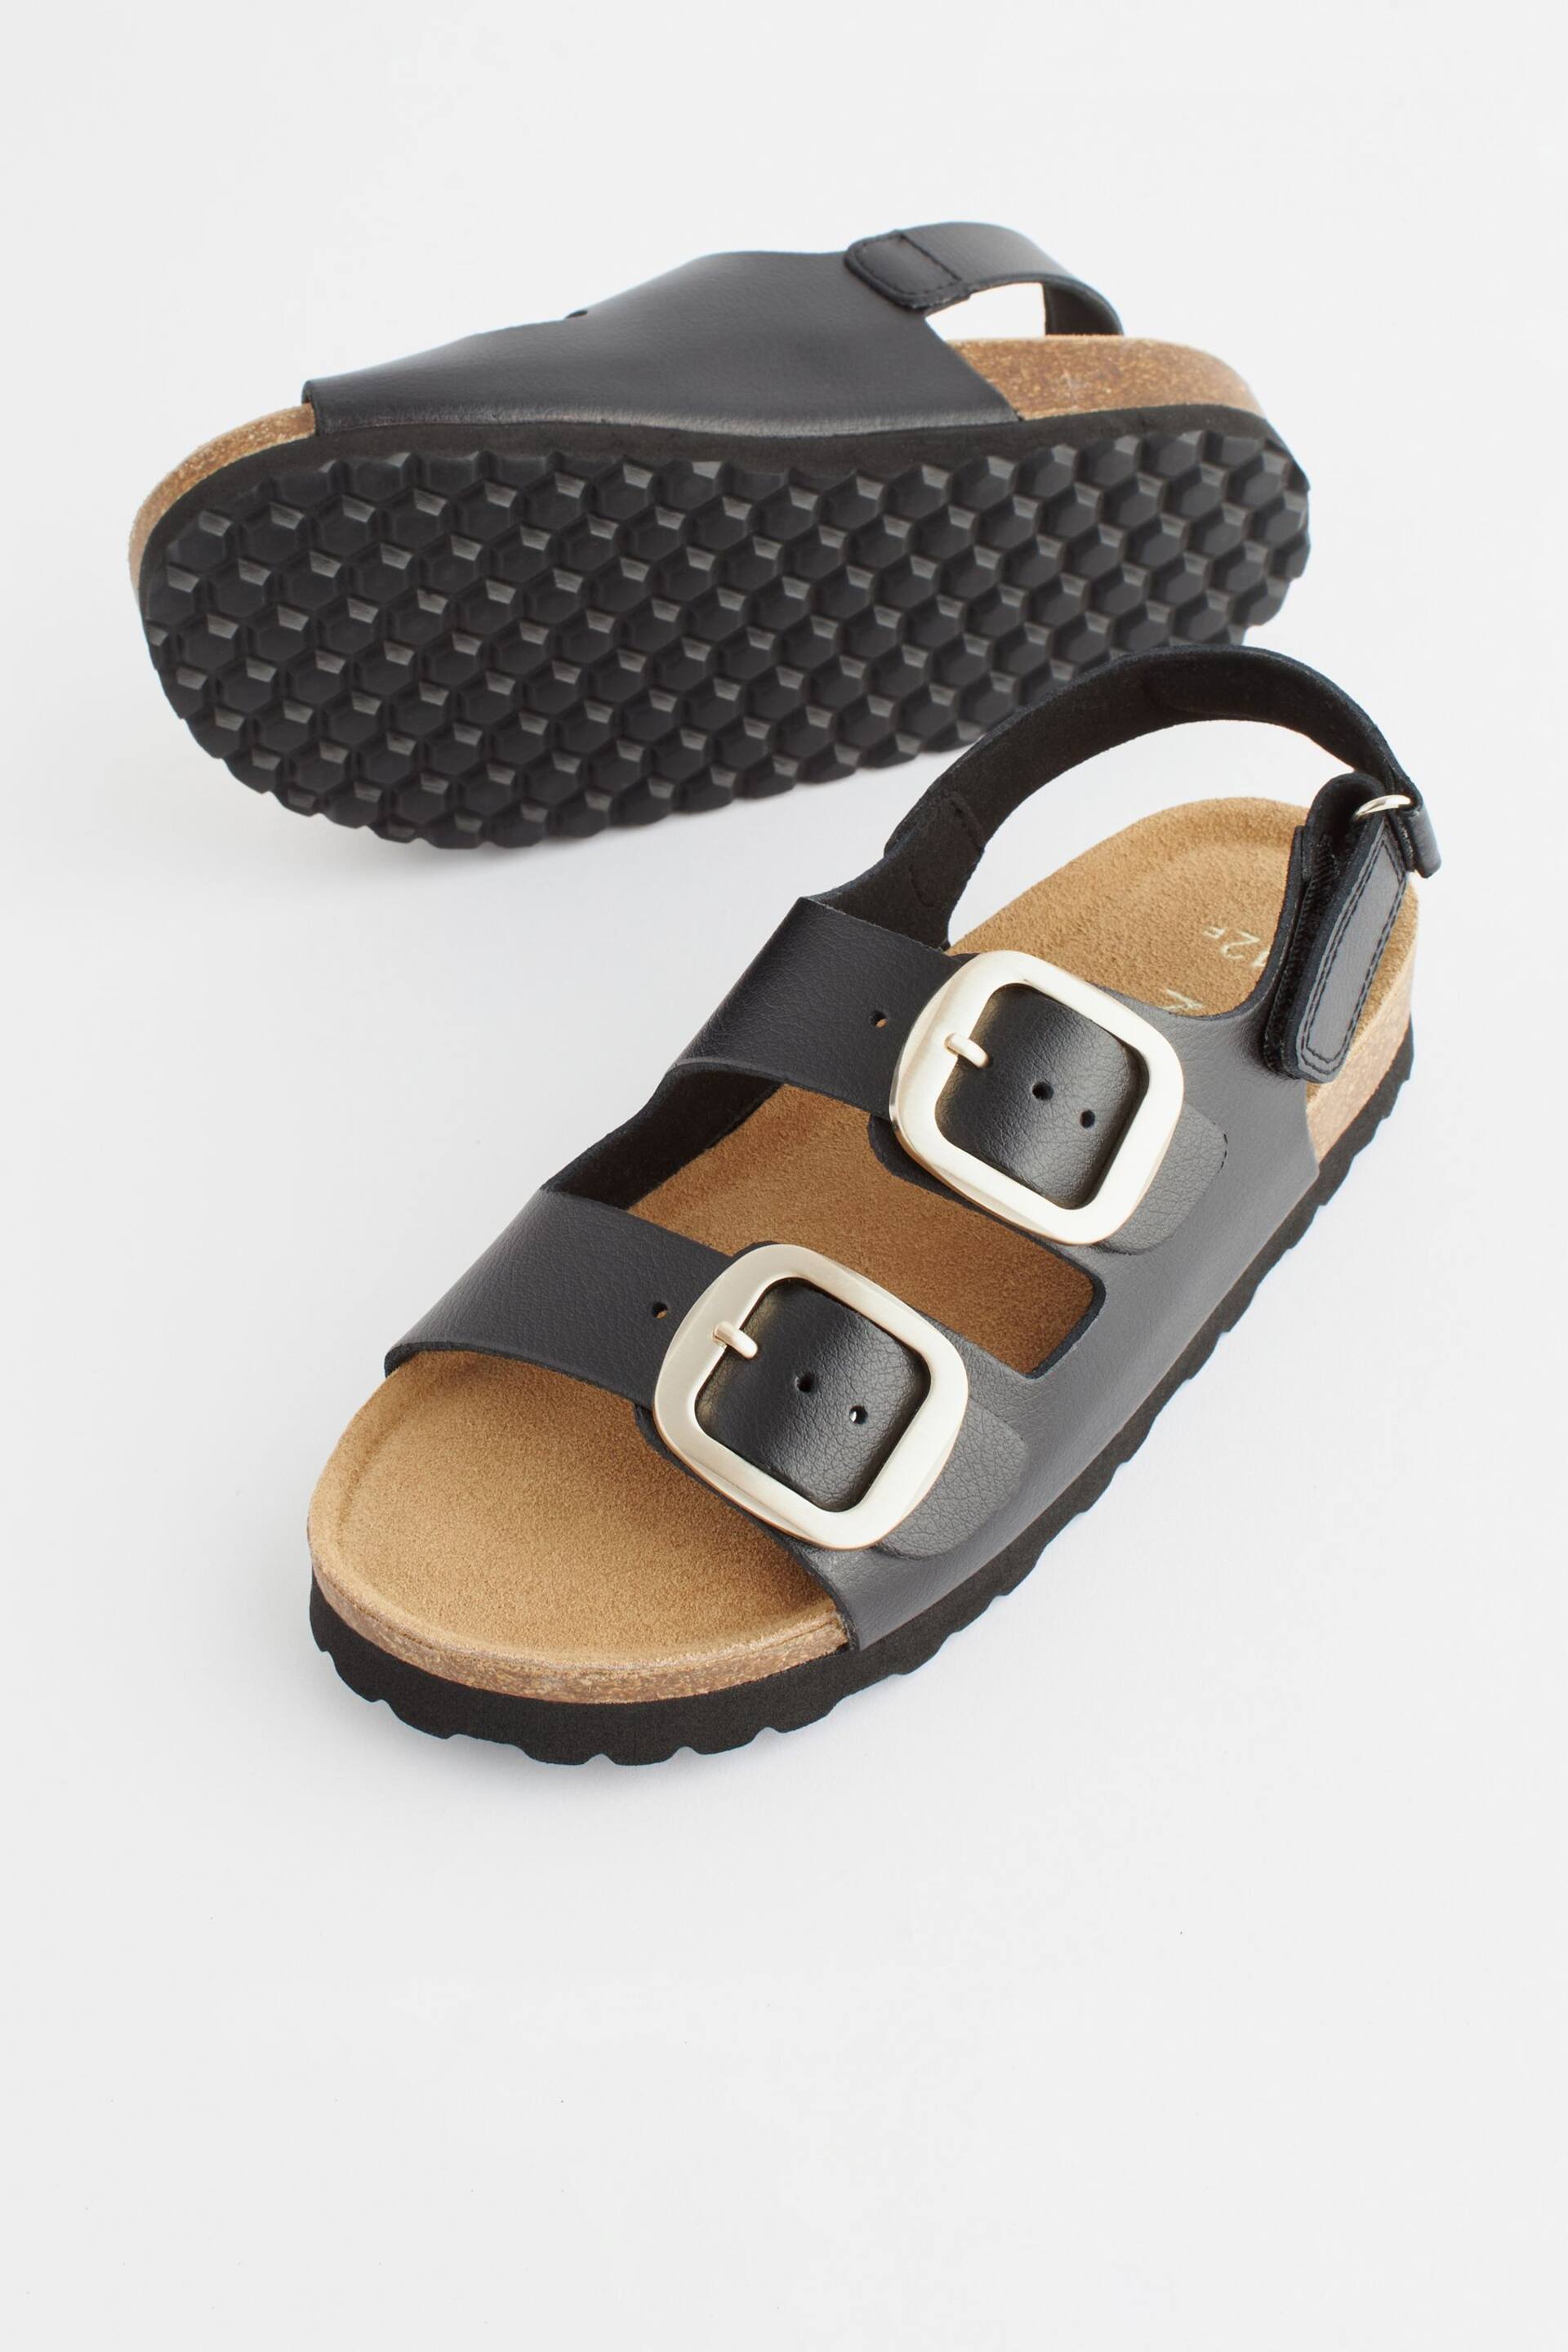 Black Leather Standard Fit (F) Two Strap Corkbed Sandals - Image 4 of 8